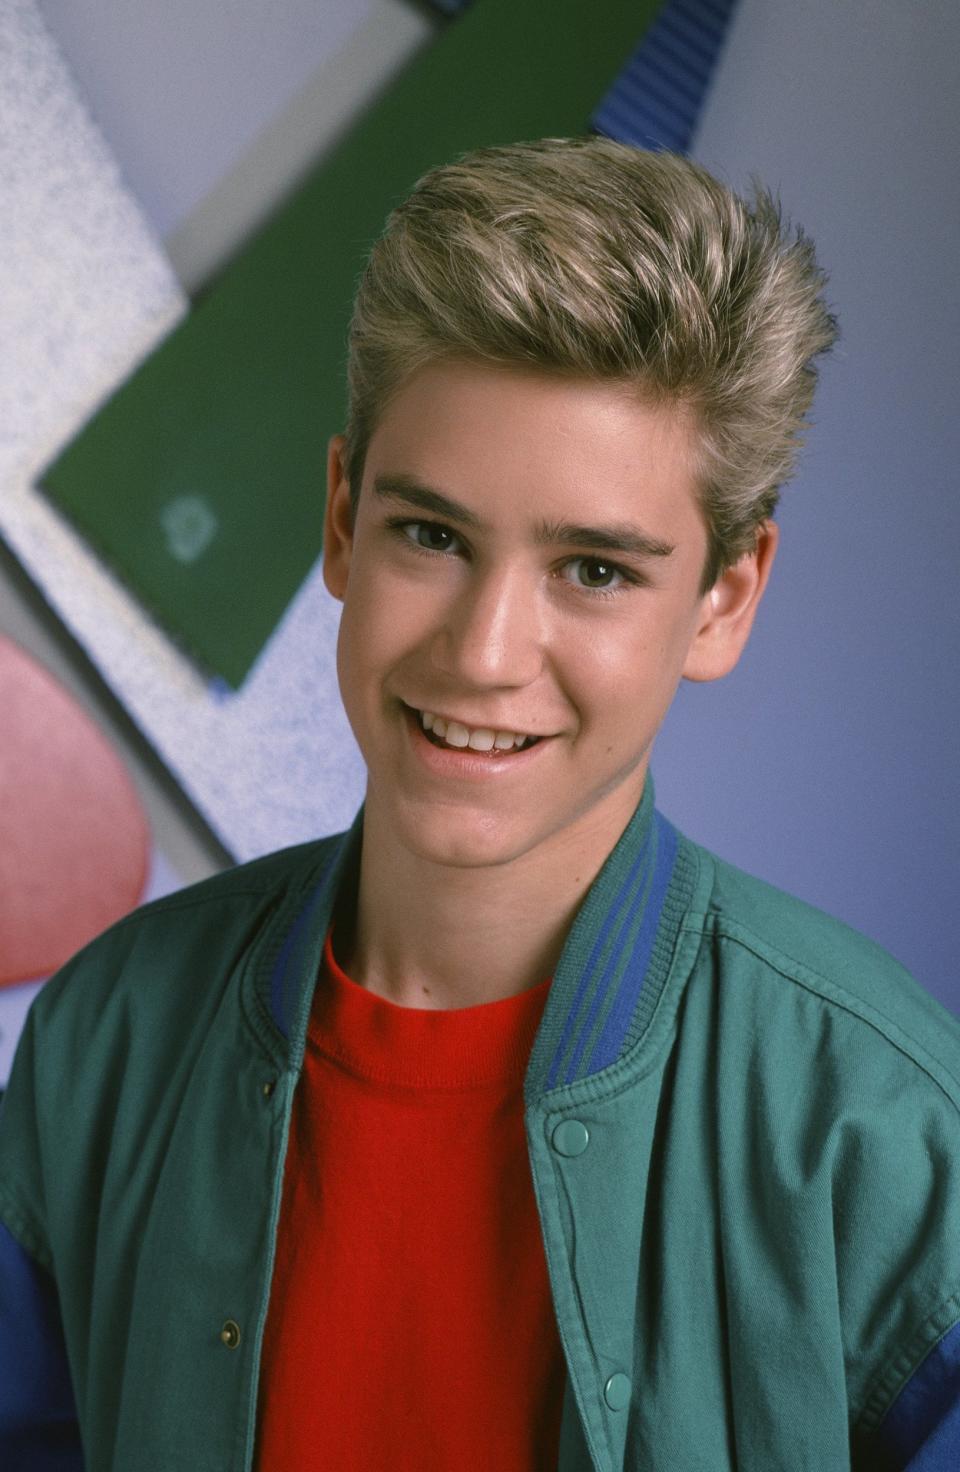 Mark-Paul Gosselaar is known for his famous role as Zack Morris in Saved by the Bell. He was 15 years old at the time, although he had started acting three years prior.   